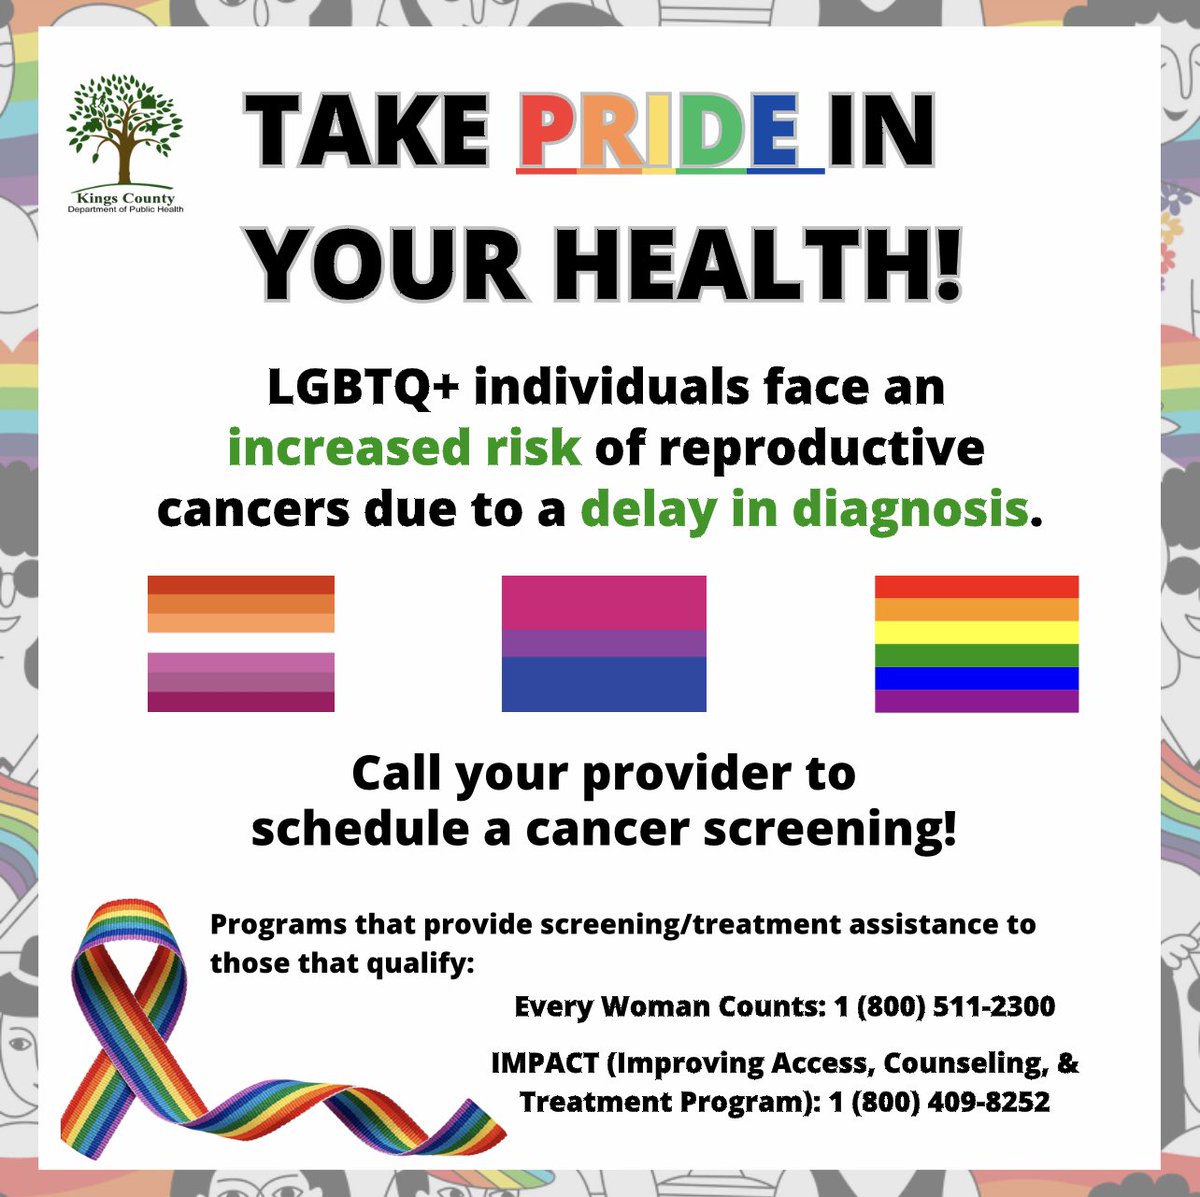 To schedule a screening, contact your provider. To learn more about cancer and the LGBTQ+ community, visit: cancer-network.org/cancer-informa…